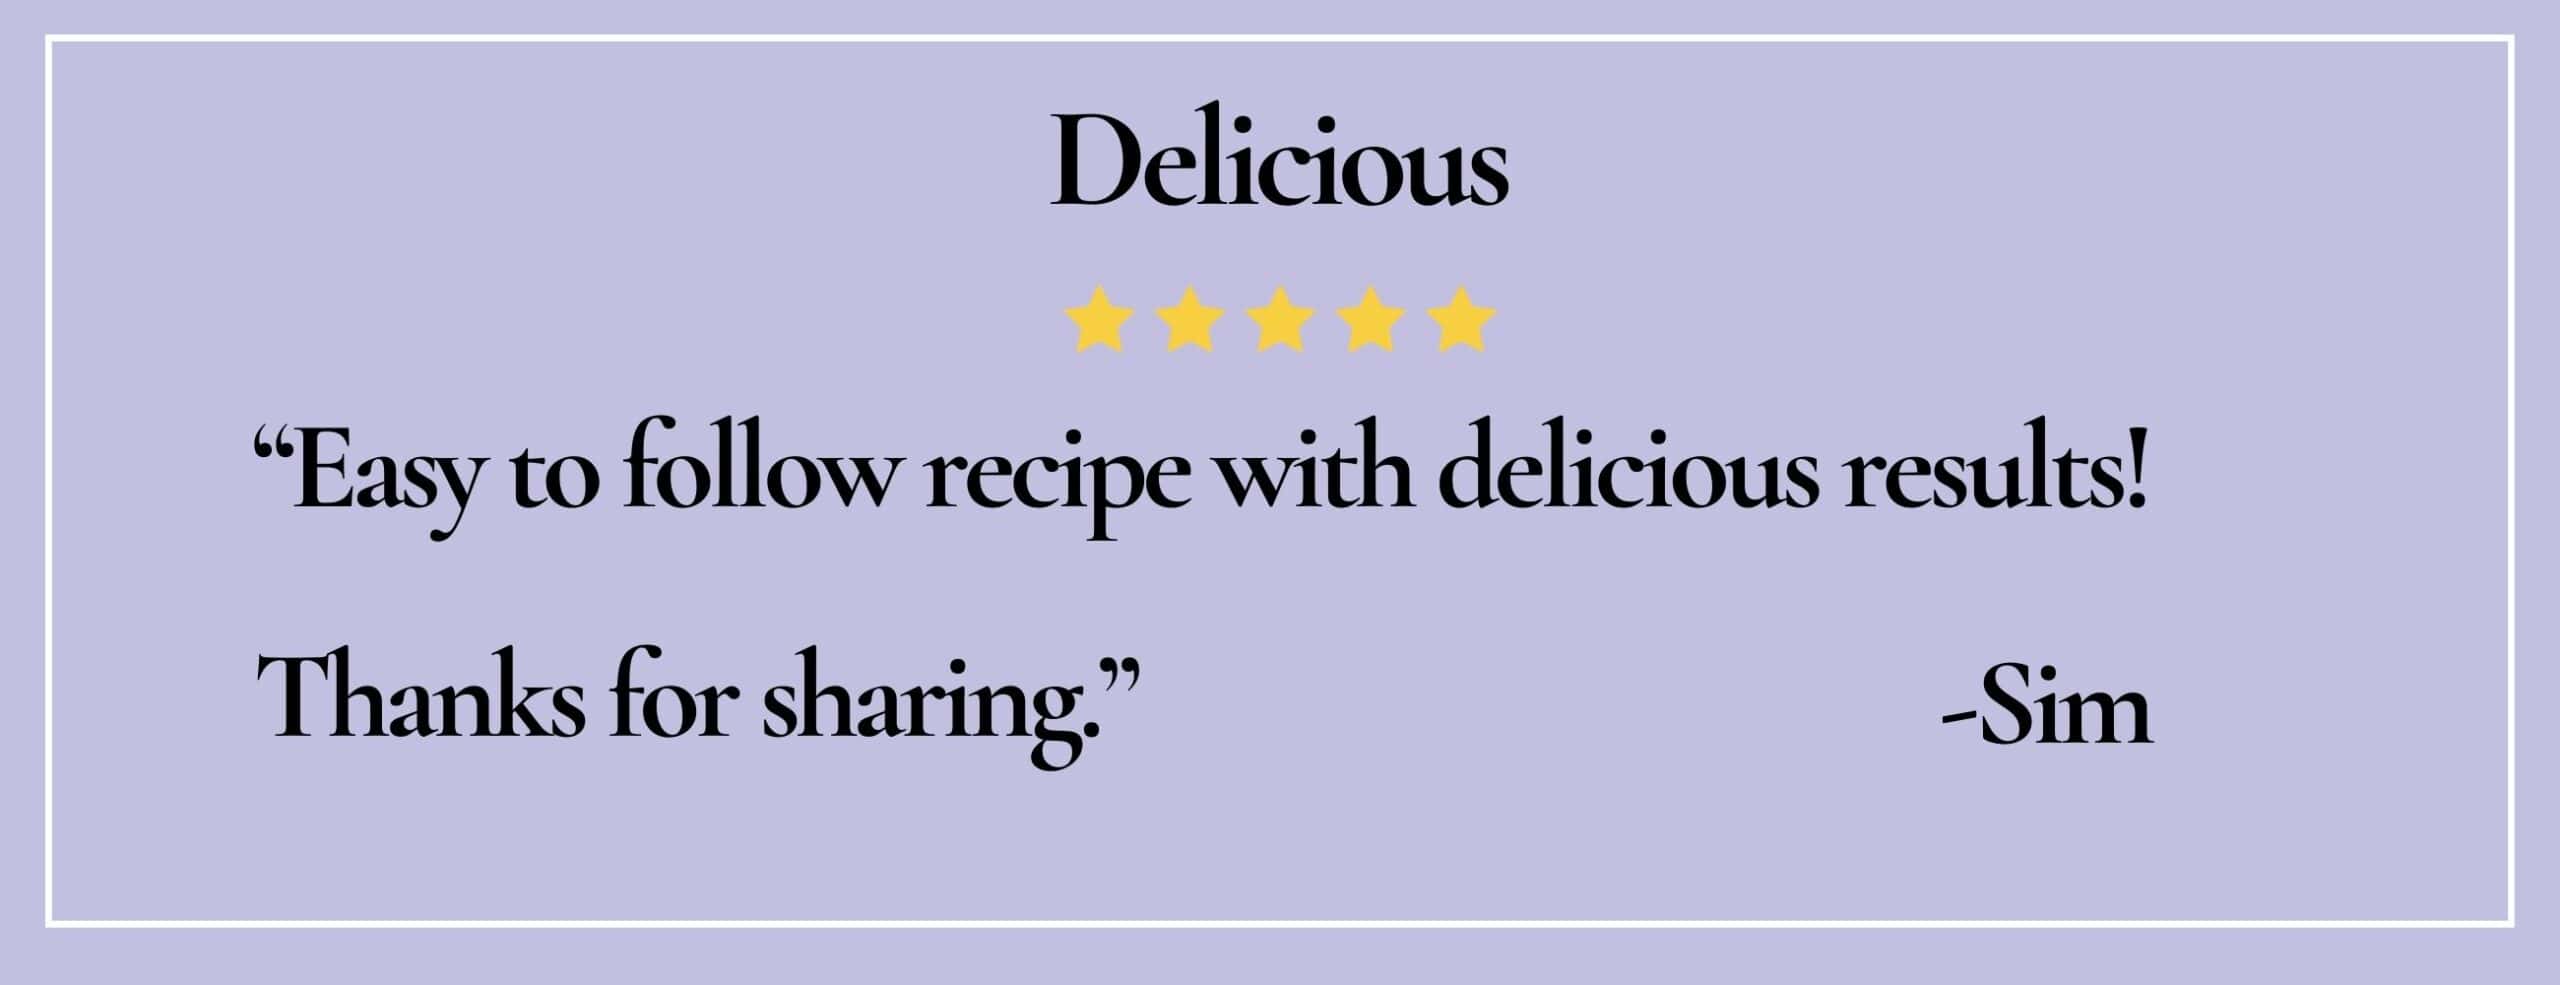 text box with quote: Delicious "Easy to follow recipe with delicious results! Thanks for sharing."-Sim